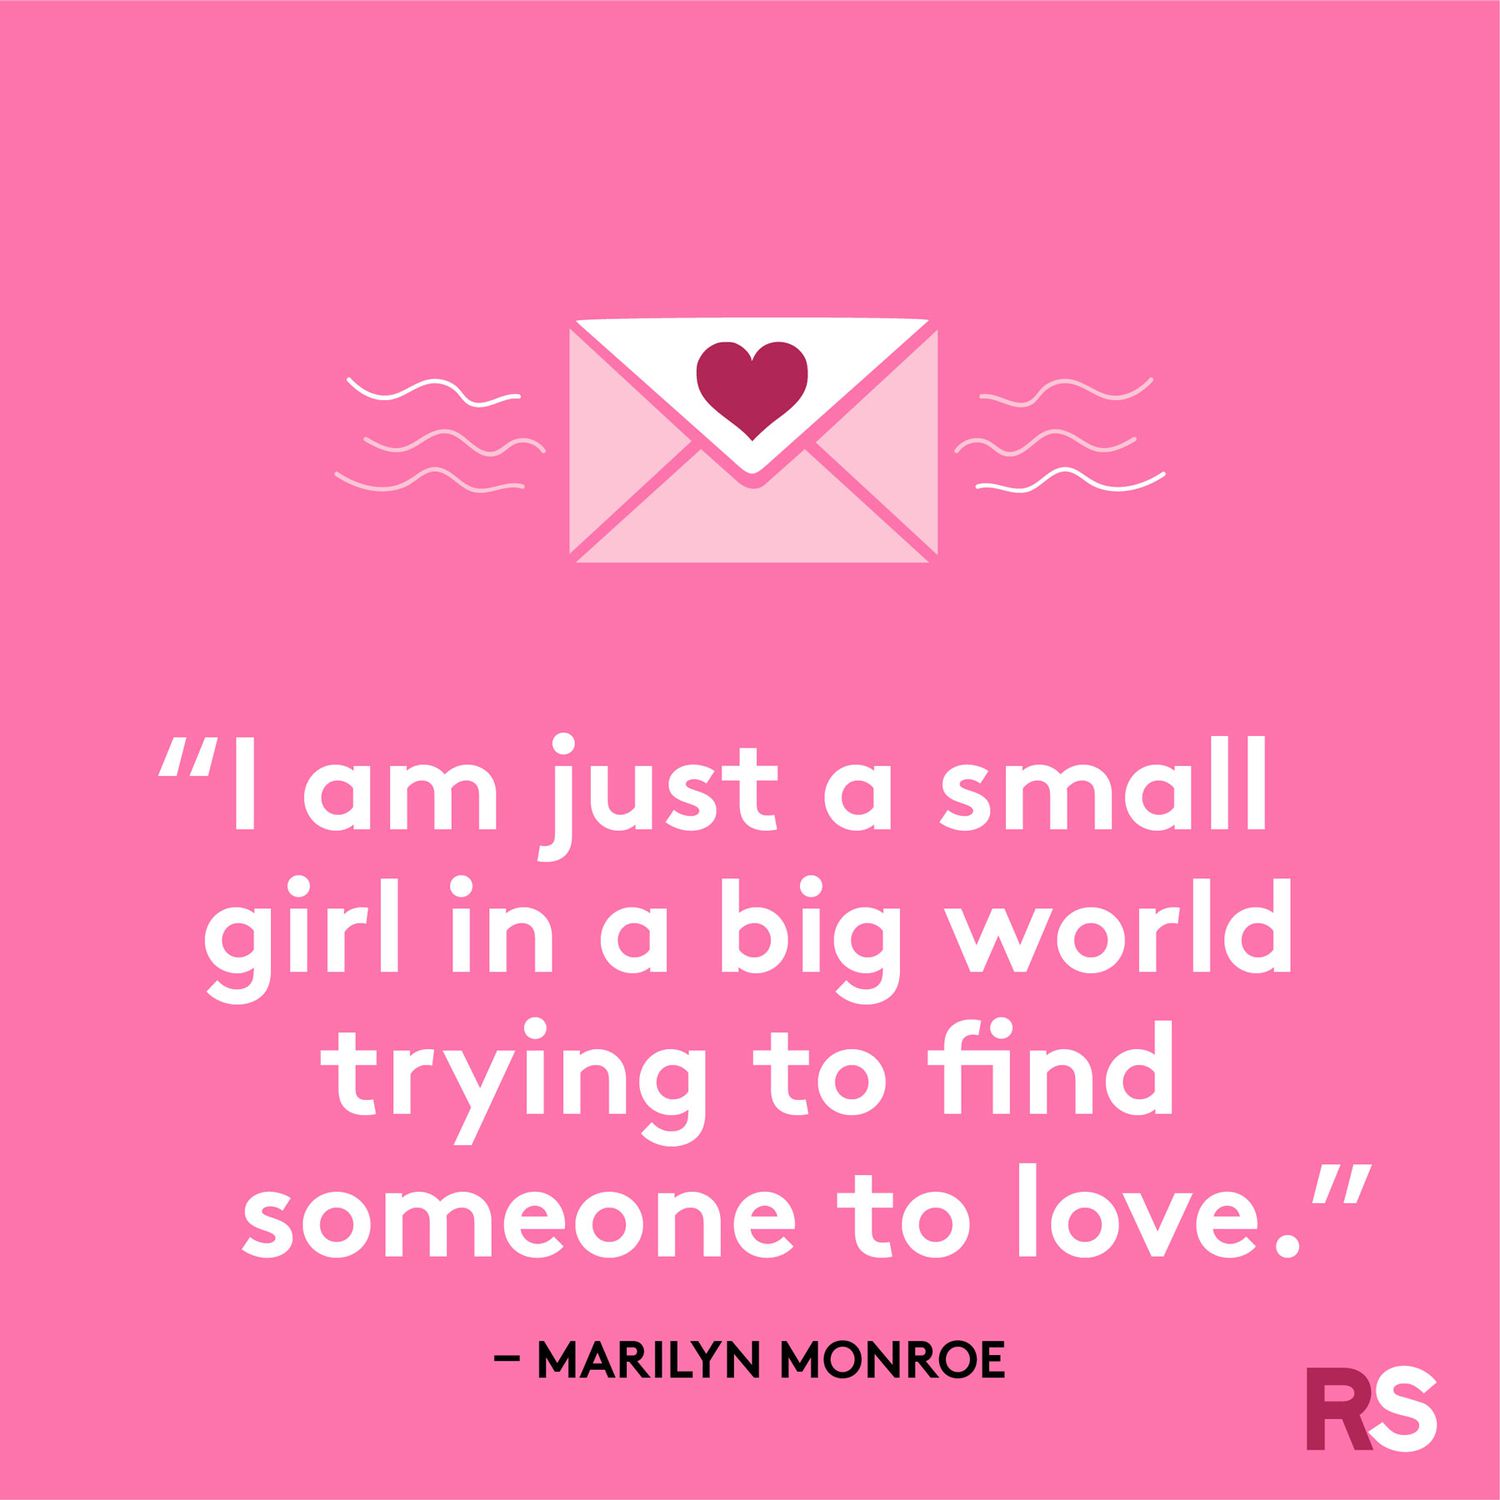 Love quotes, quotes about love - Marilyn Monroe